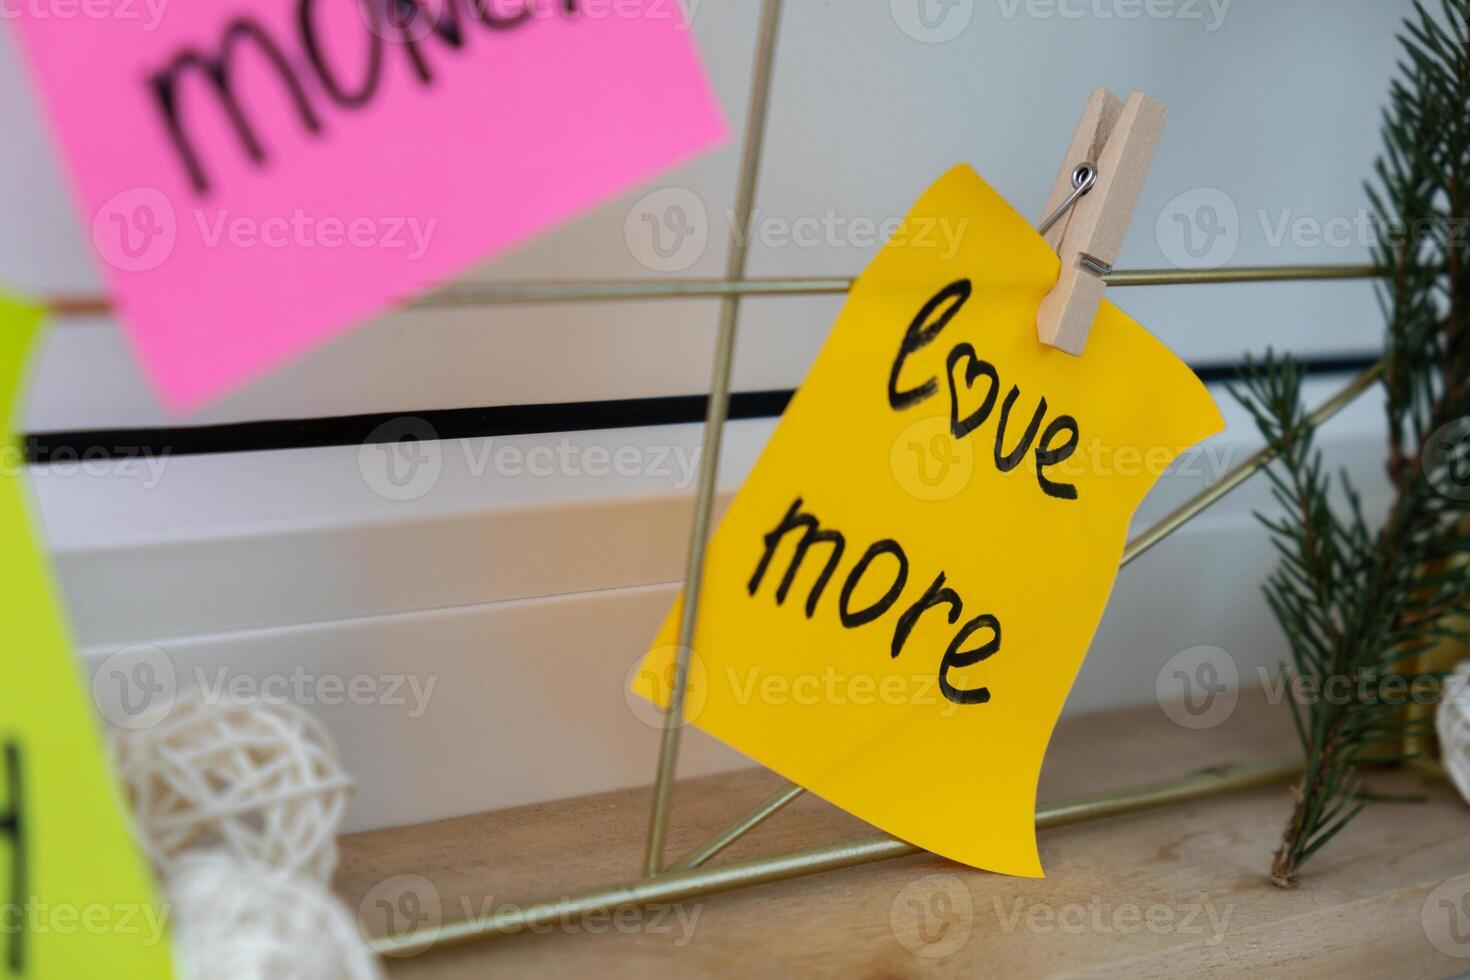 LOVE MORE goal on Vision board with new year resolutions aims on sticky notes. Preparation for New Year. Concept of planning and setting goals for personal development photo